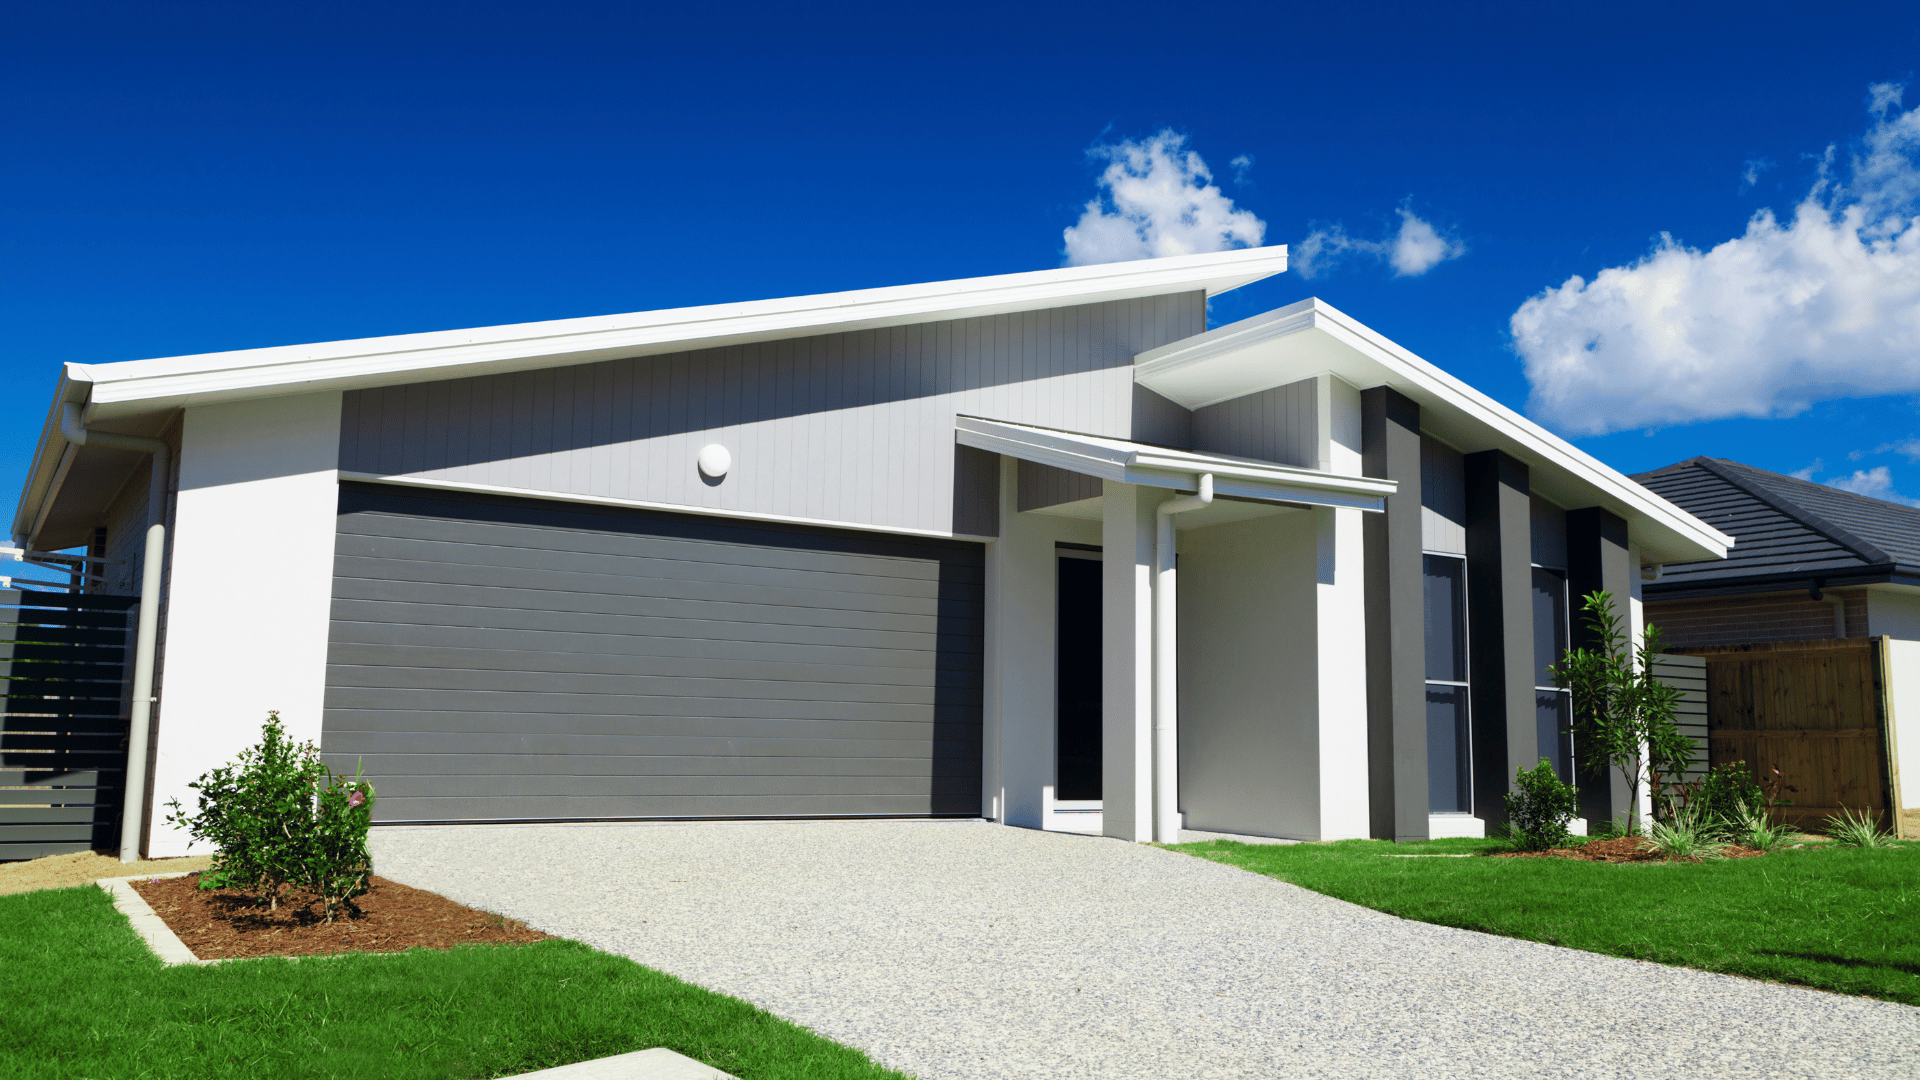 New house and land packages come with modern designs and features that adhere to the latest building codes and energy efficiency standards. 